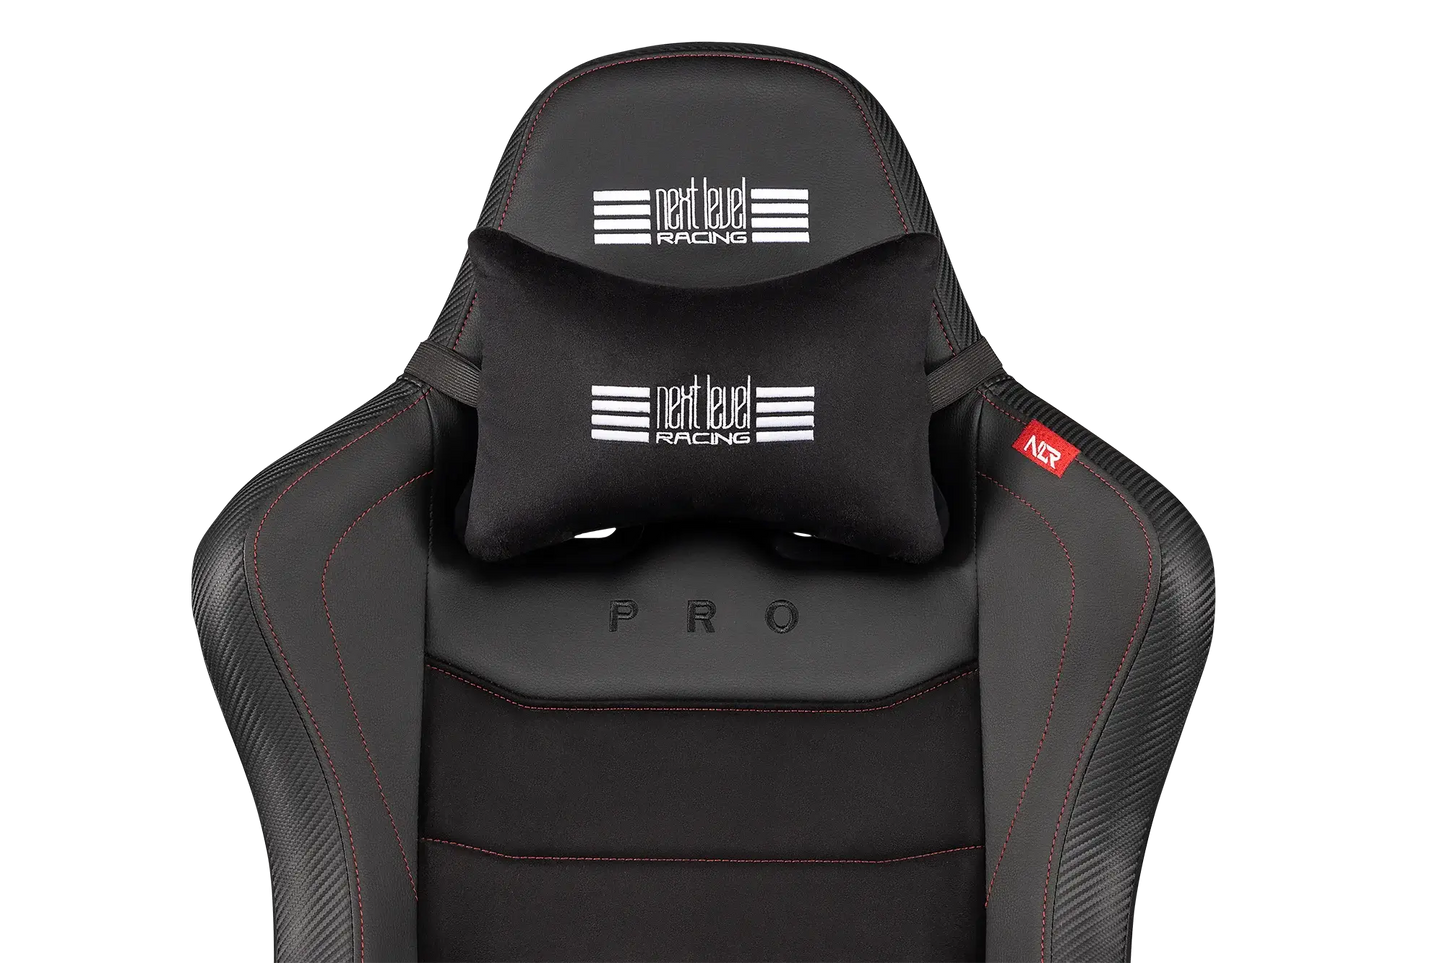 Next Level Racing Pro Gaming Chair Leather Edition (NLR-G002)